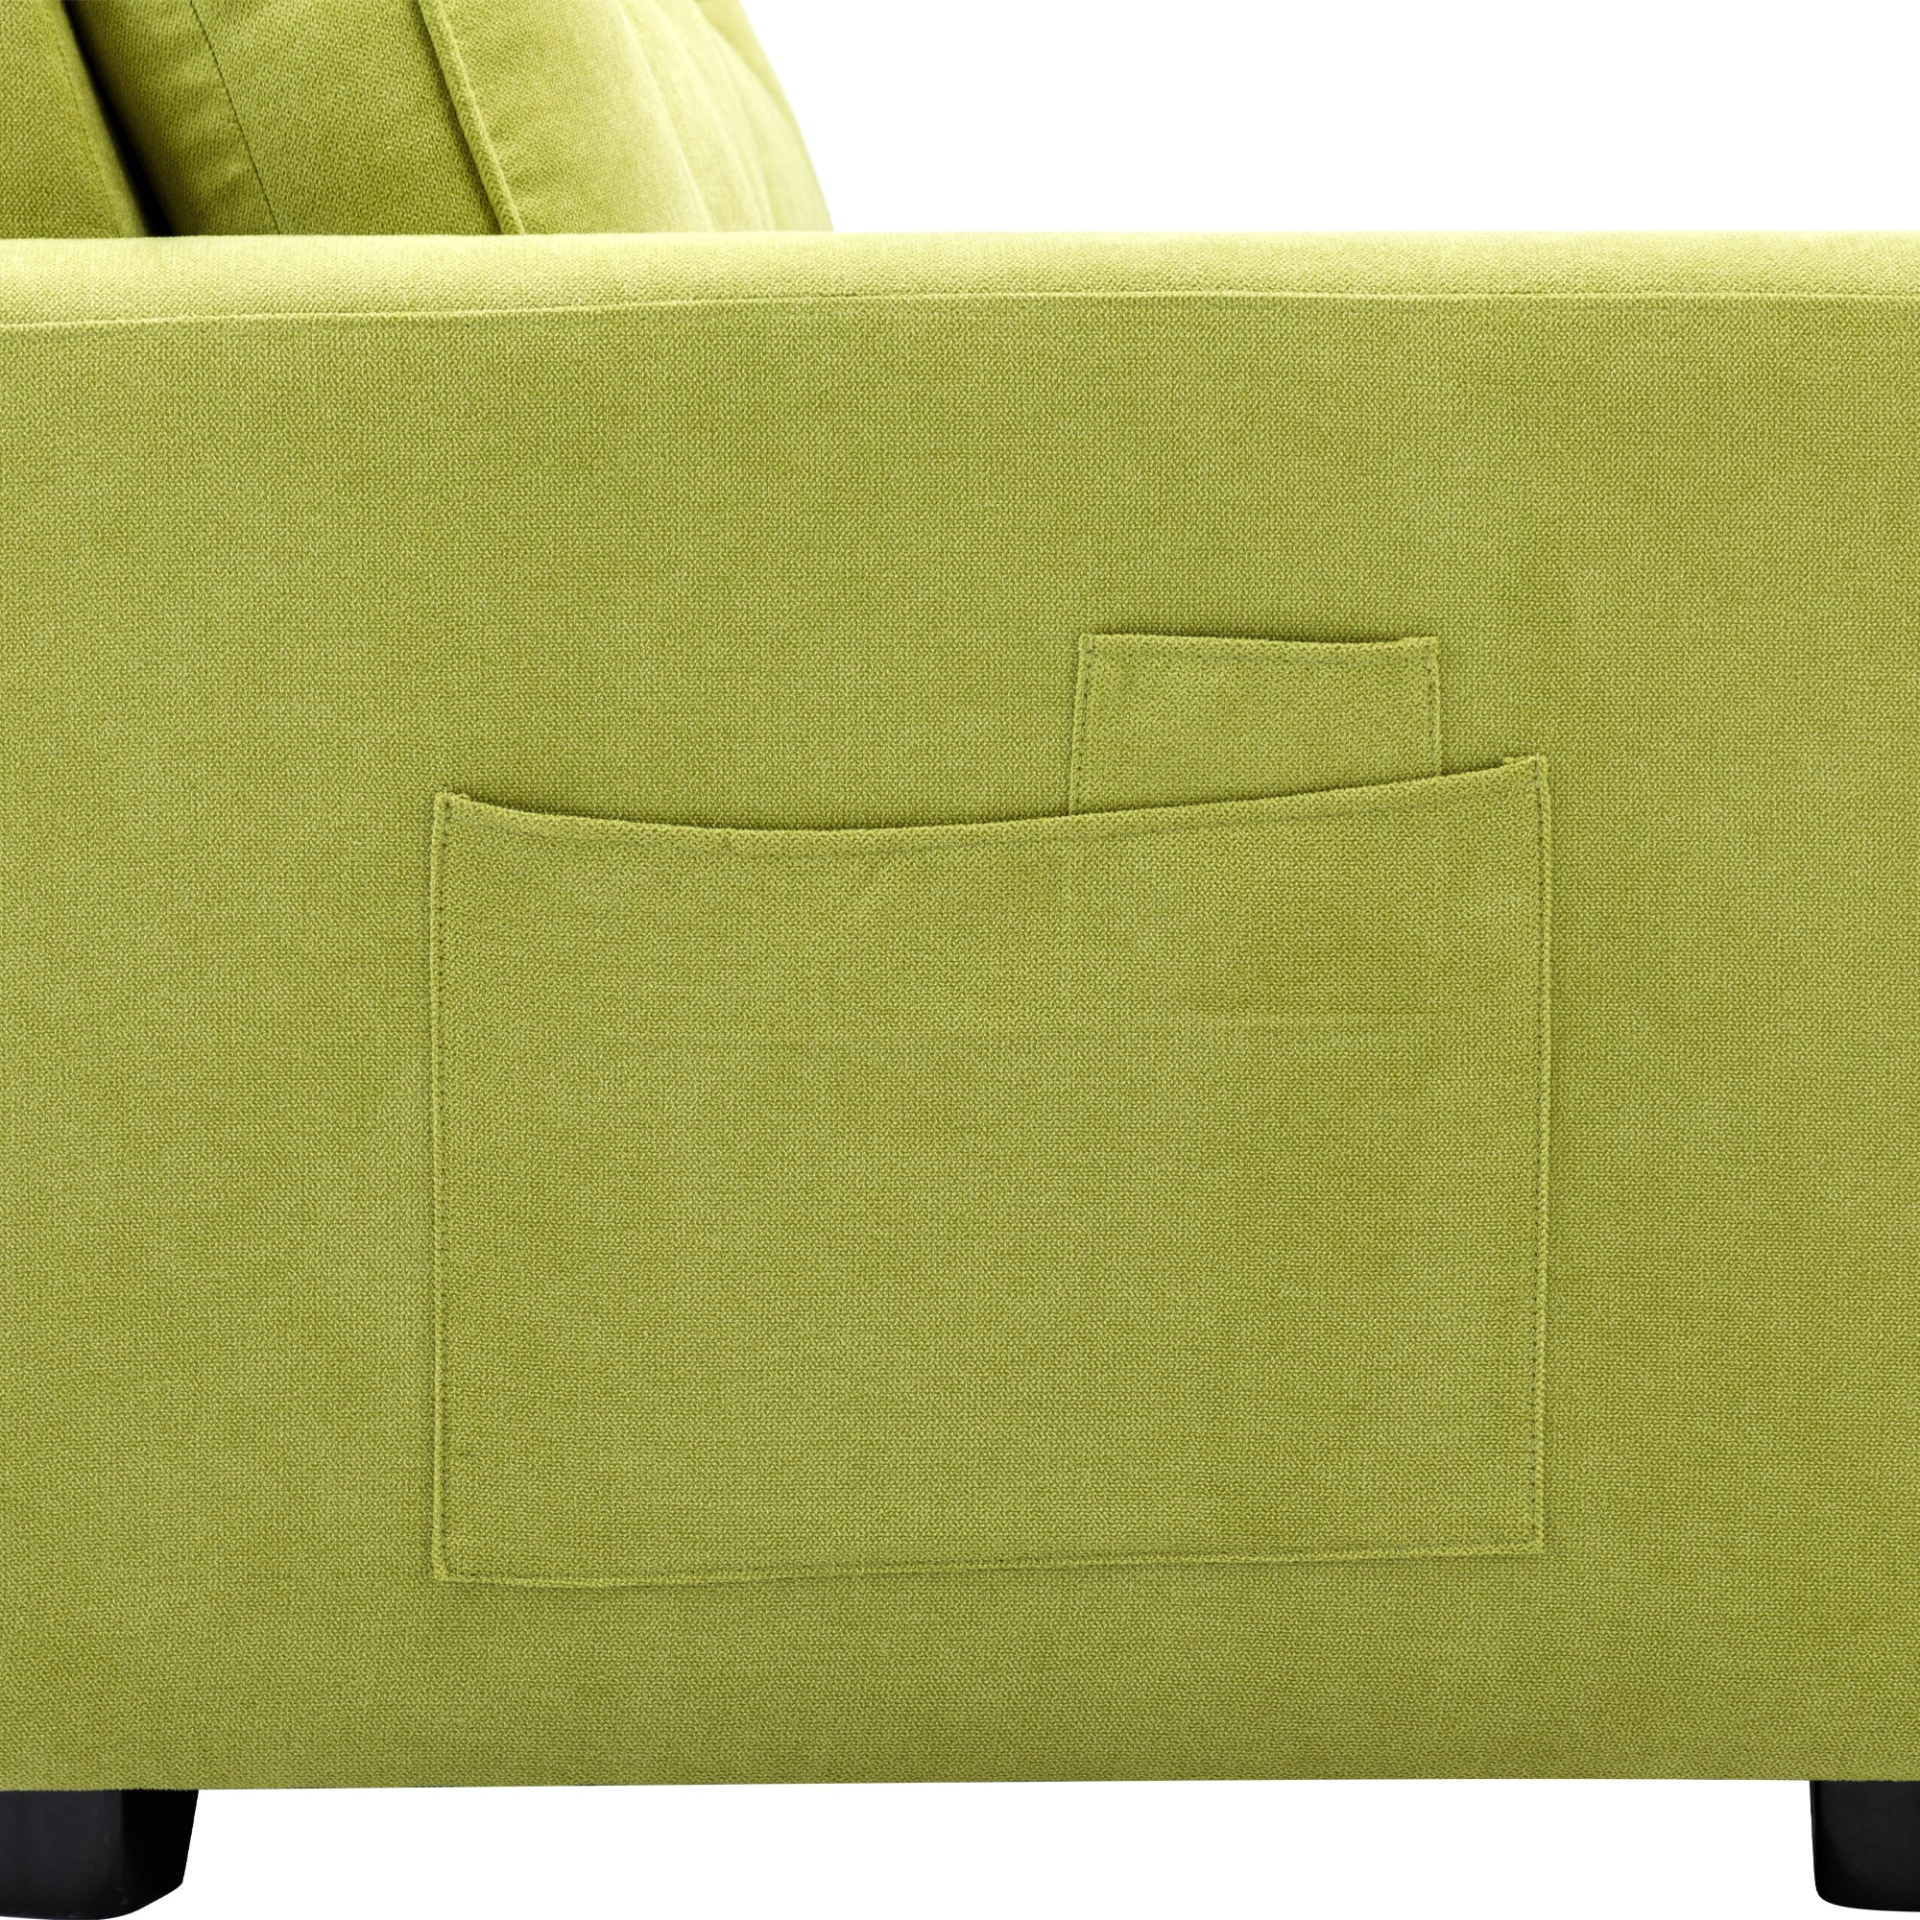 Bright Green - Contemporary Loveseat Style Sofa with Pull-Out Bed (59")